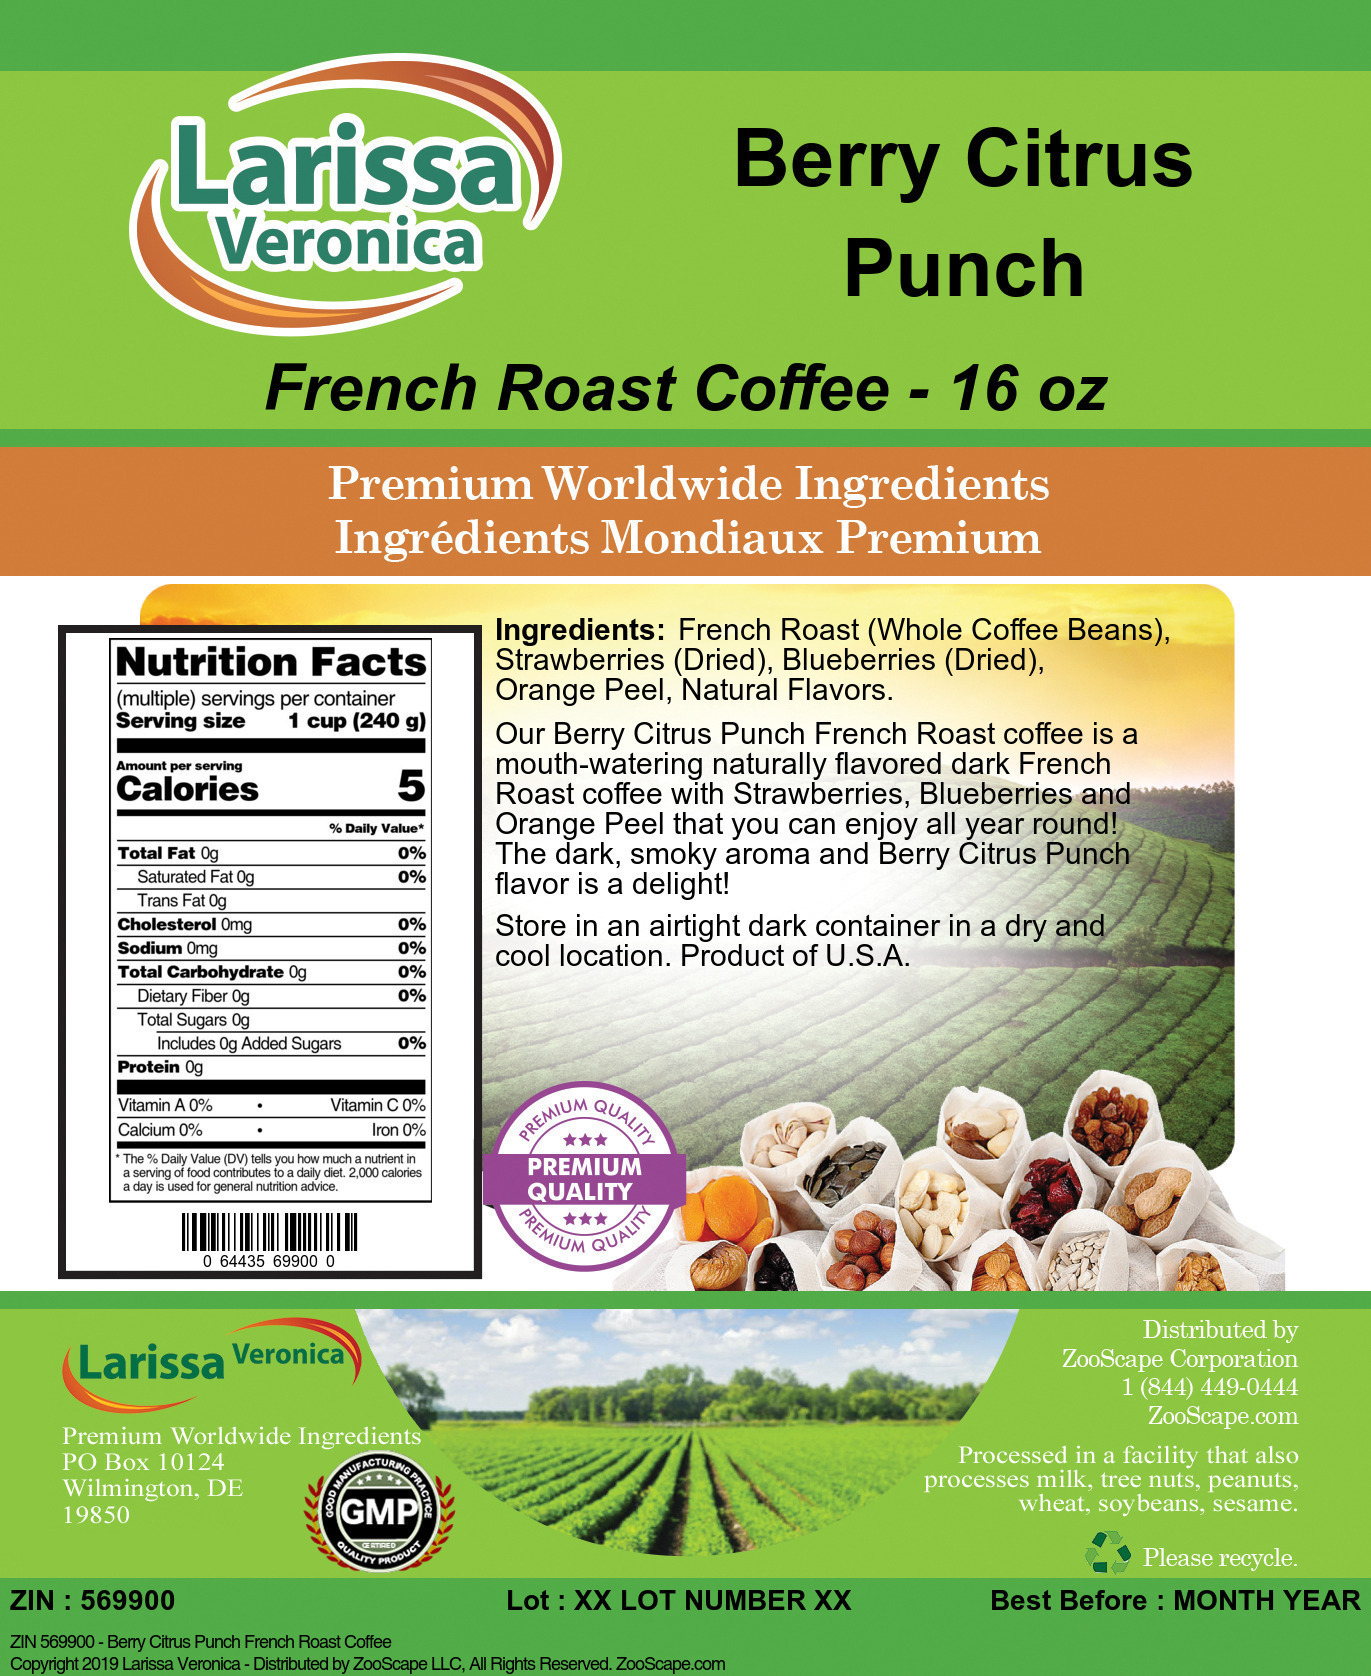 Berry Citrus Punch French Roast Coffee - Label